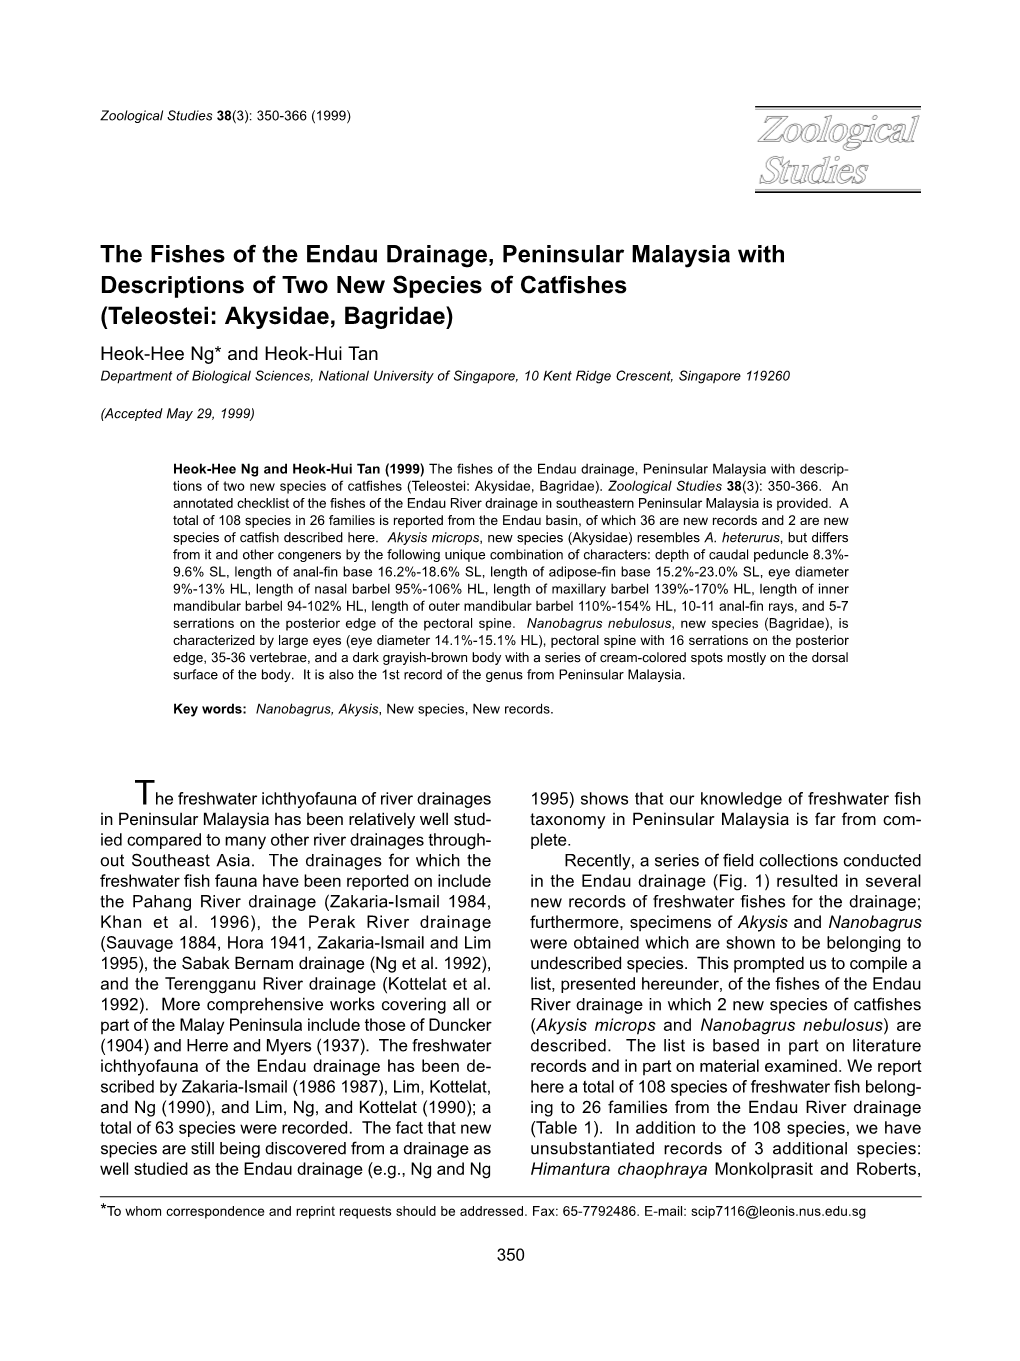 The Fishes of the Endau Drainage, Peninsular Malaysia with Descriptions of Two New Species of Catfishes